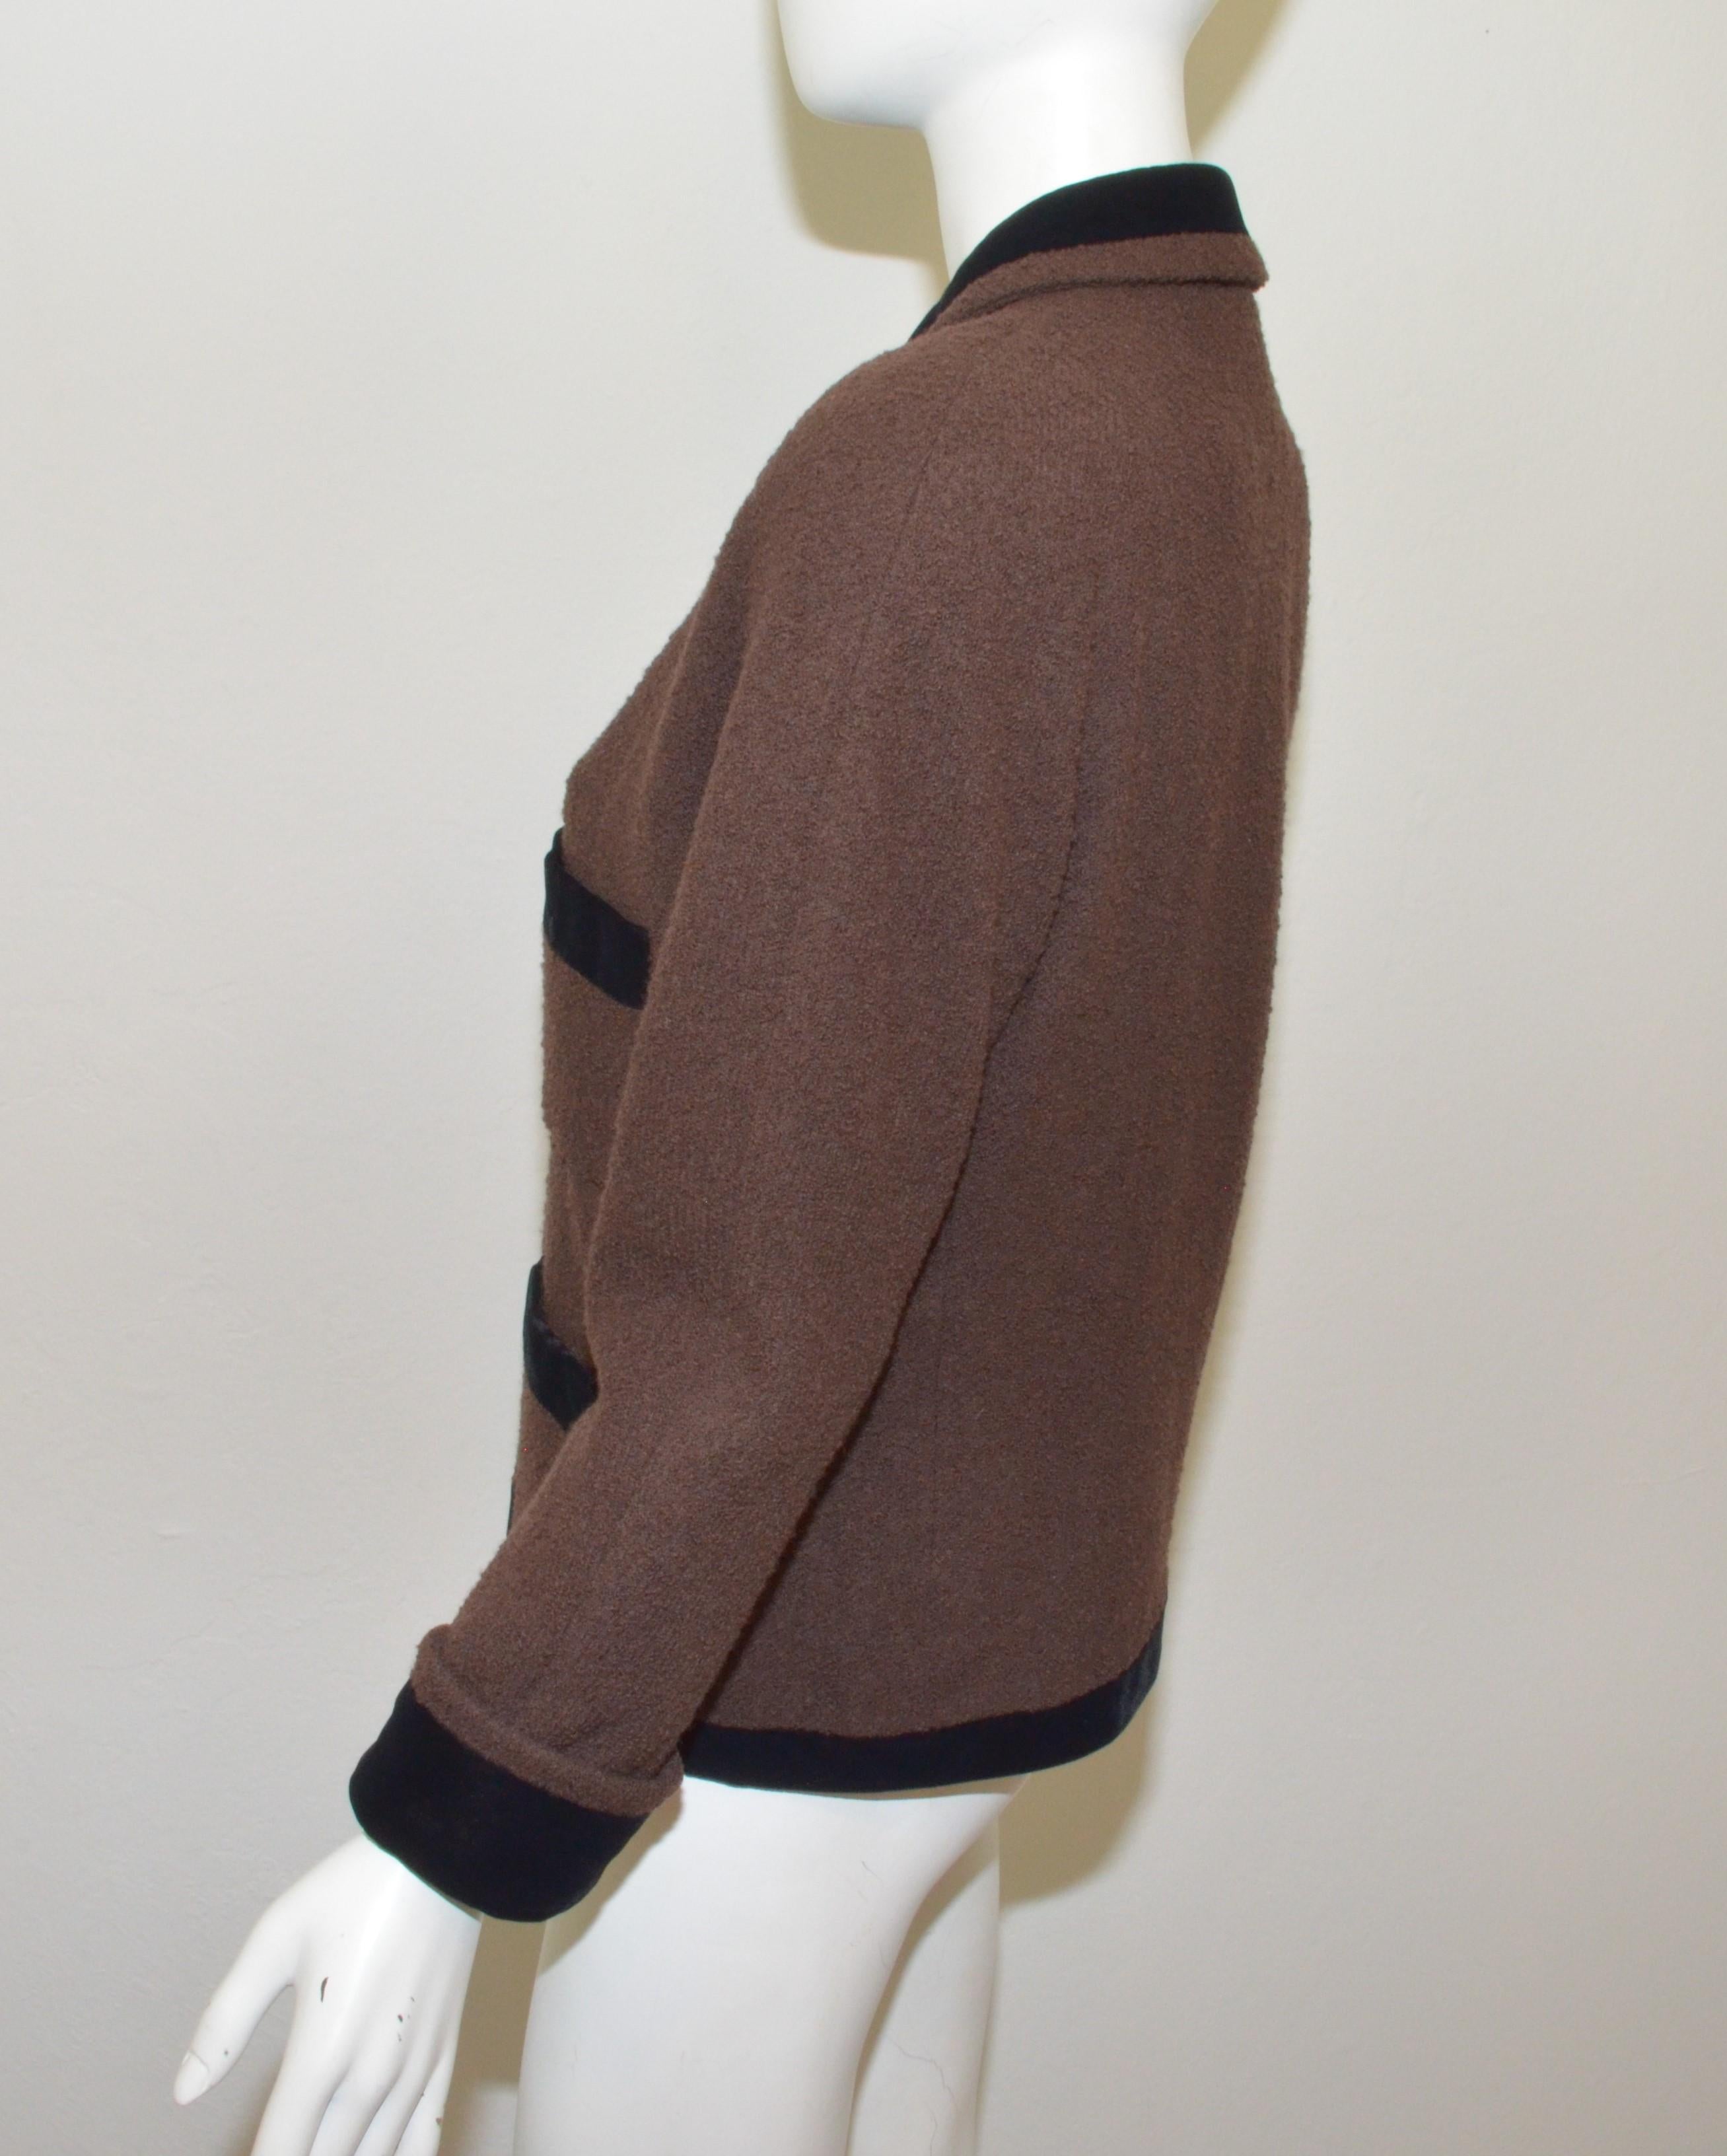 1980’s Chanel Brown Tweed Jacket with Velvet Trim -- jacket is featured in a brown tweed knit with black velvet trimming and an open front with a clover & chain latch closure at the collar. Jacket is fully lined in silk with a chain trim along the